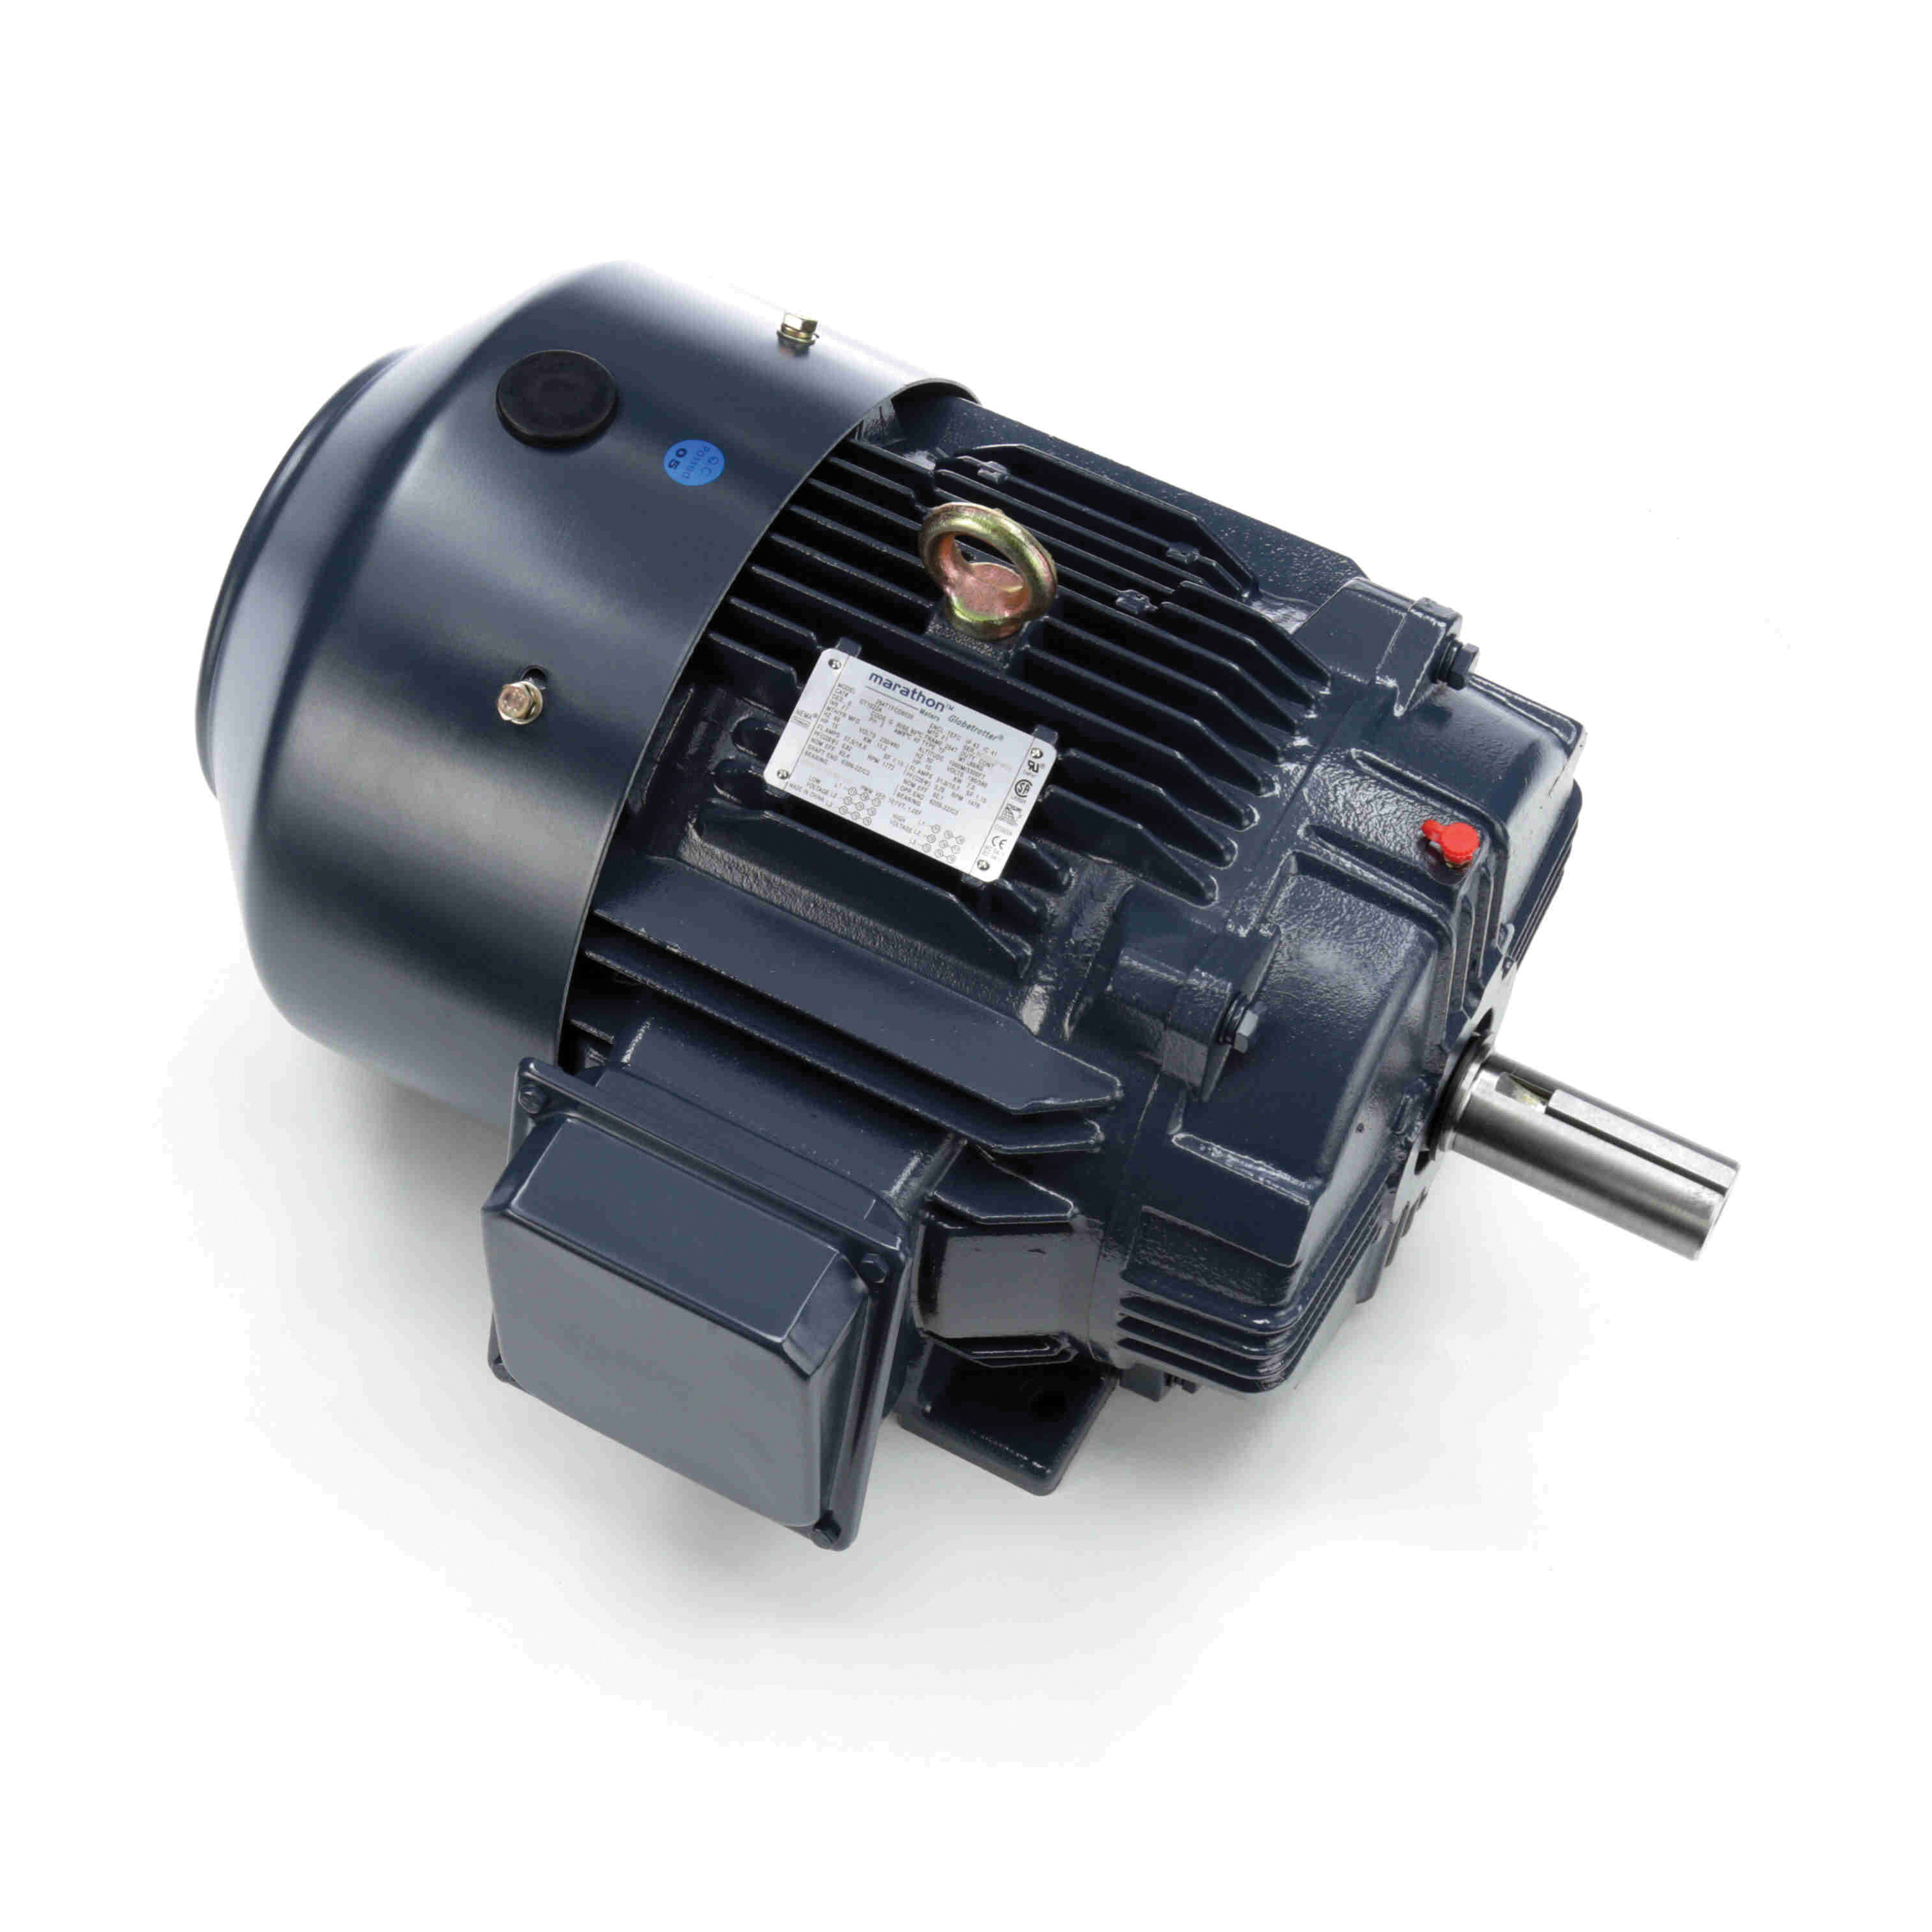 Marathon® Globetrotter® GT1022A General Purpose Motor, 208 to 230/460 V, 18.8/37.5 to 40 A, 11.2 kW, 15 hp, 60 Hz